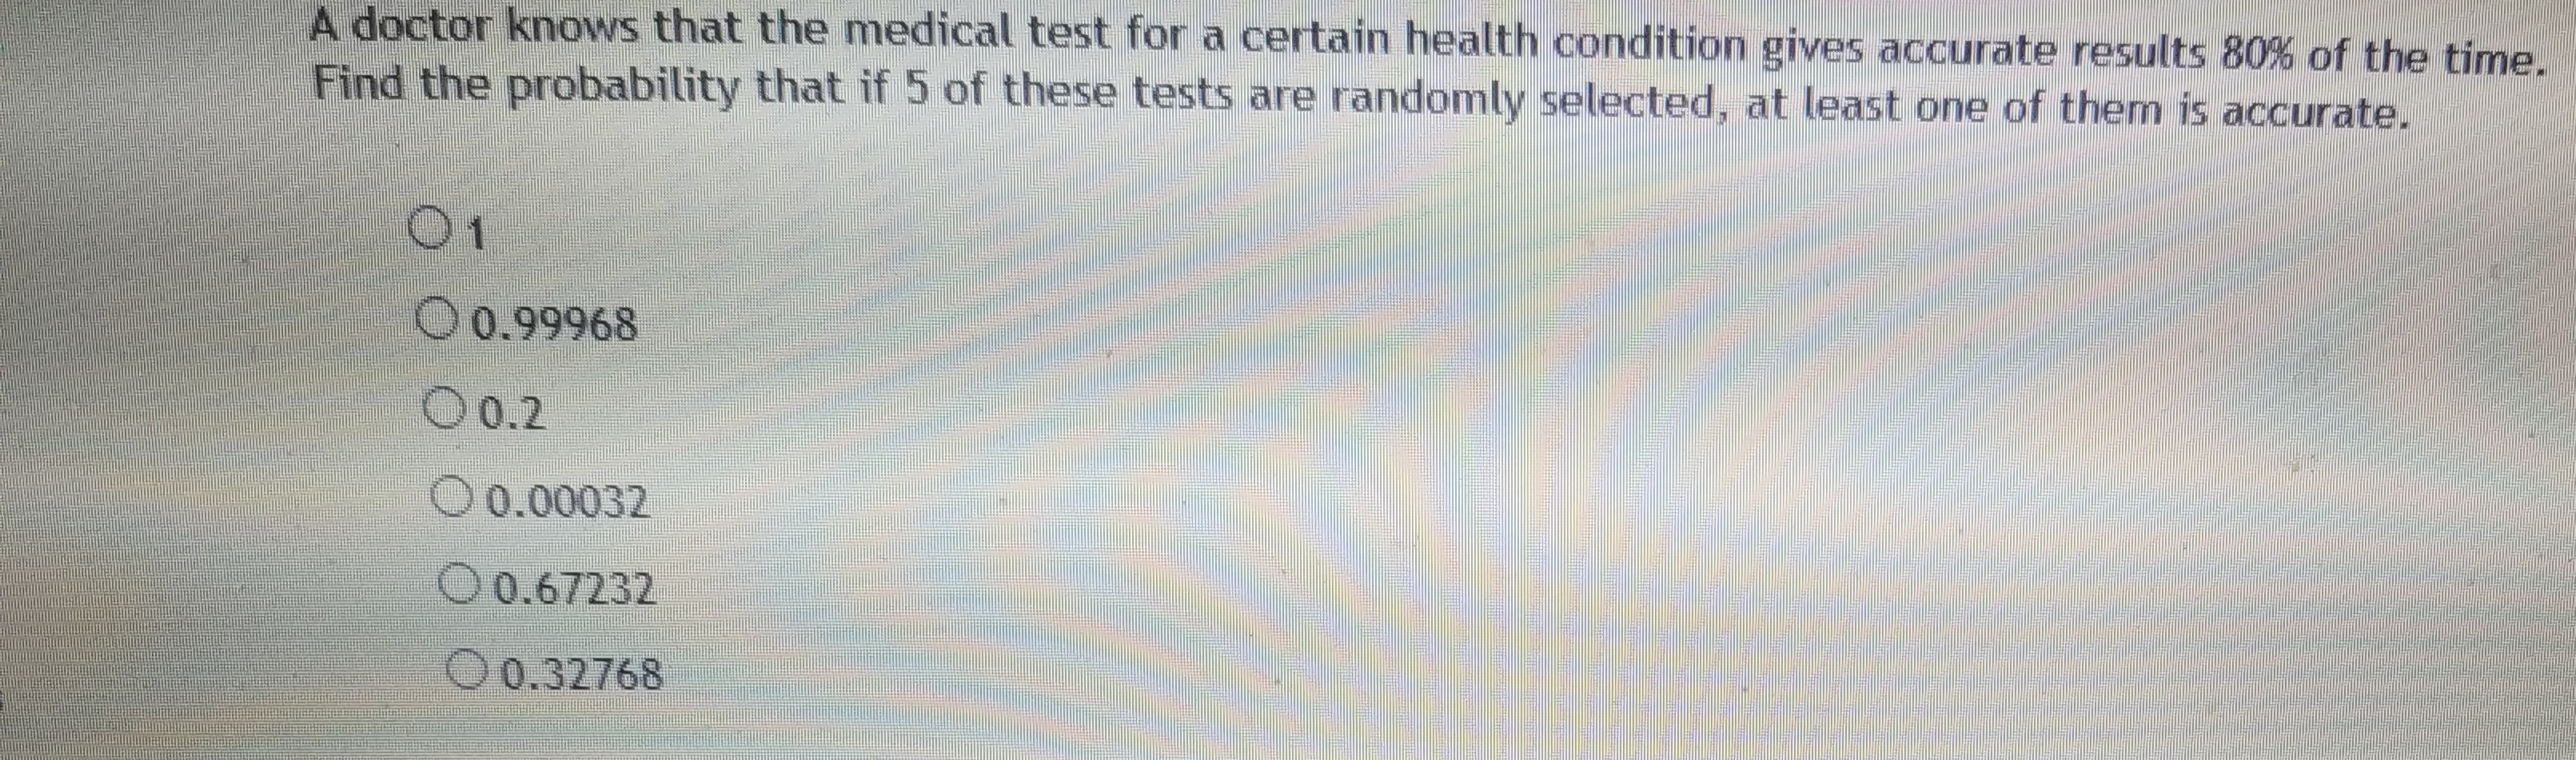 A doctor knows that the medical test for a certain health condition gives accurate resSults 80% of the time.
Find the probability that if 5 of these tests are randomly selected, at least one of them is accurate.
